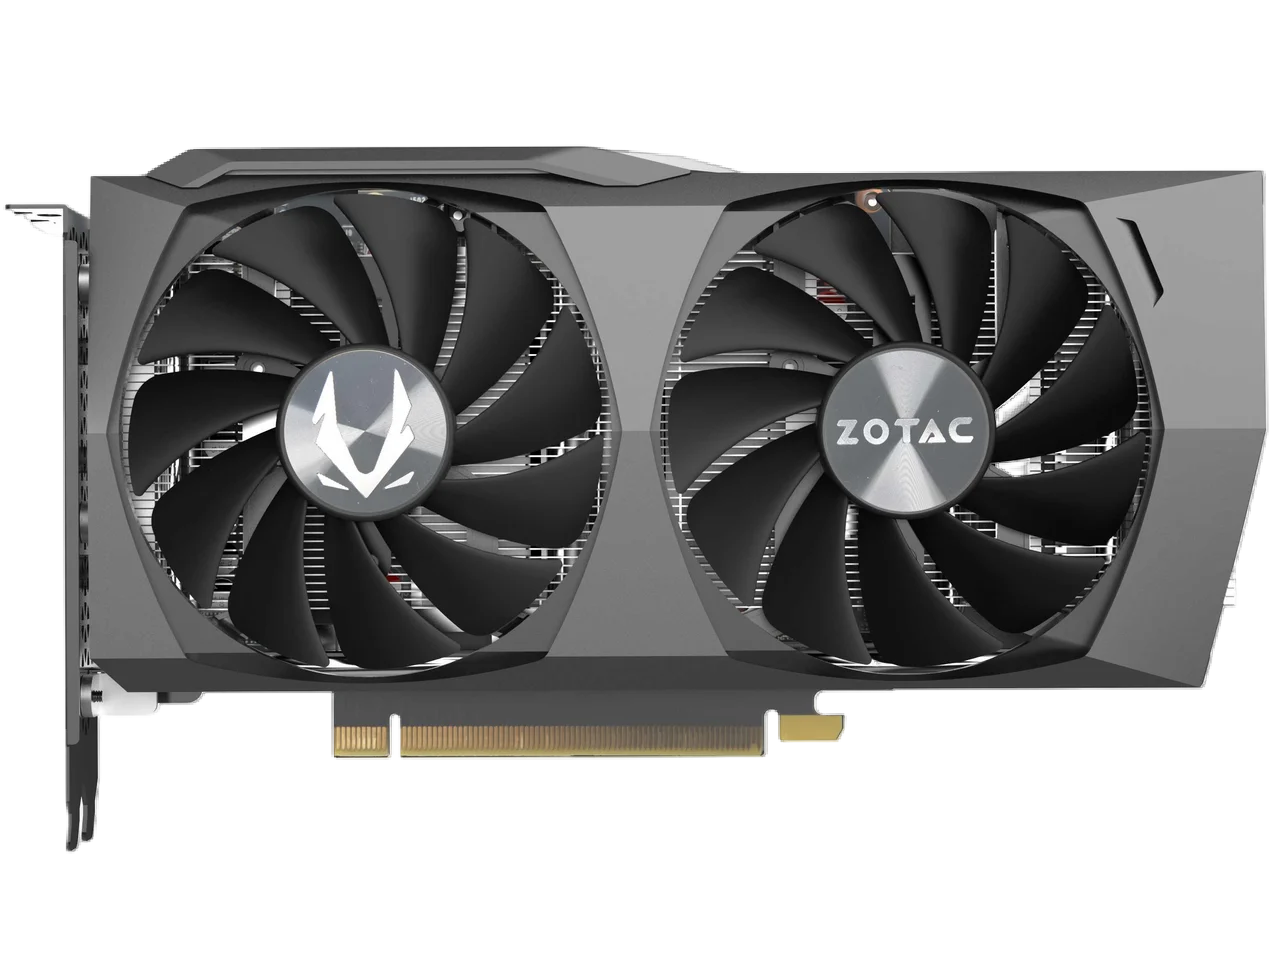 

100% OFFICIAL ZOTAC Gaming GeForce RTX 3060 Twin Edge OC 12GB GDDR6 192-bit 15 Gbps PCIE 4.0 Graphics Card, IceStorm 2.0 Cooling